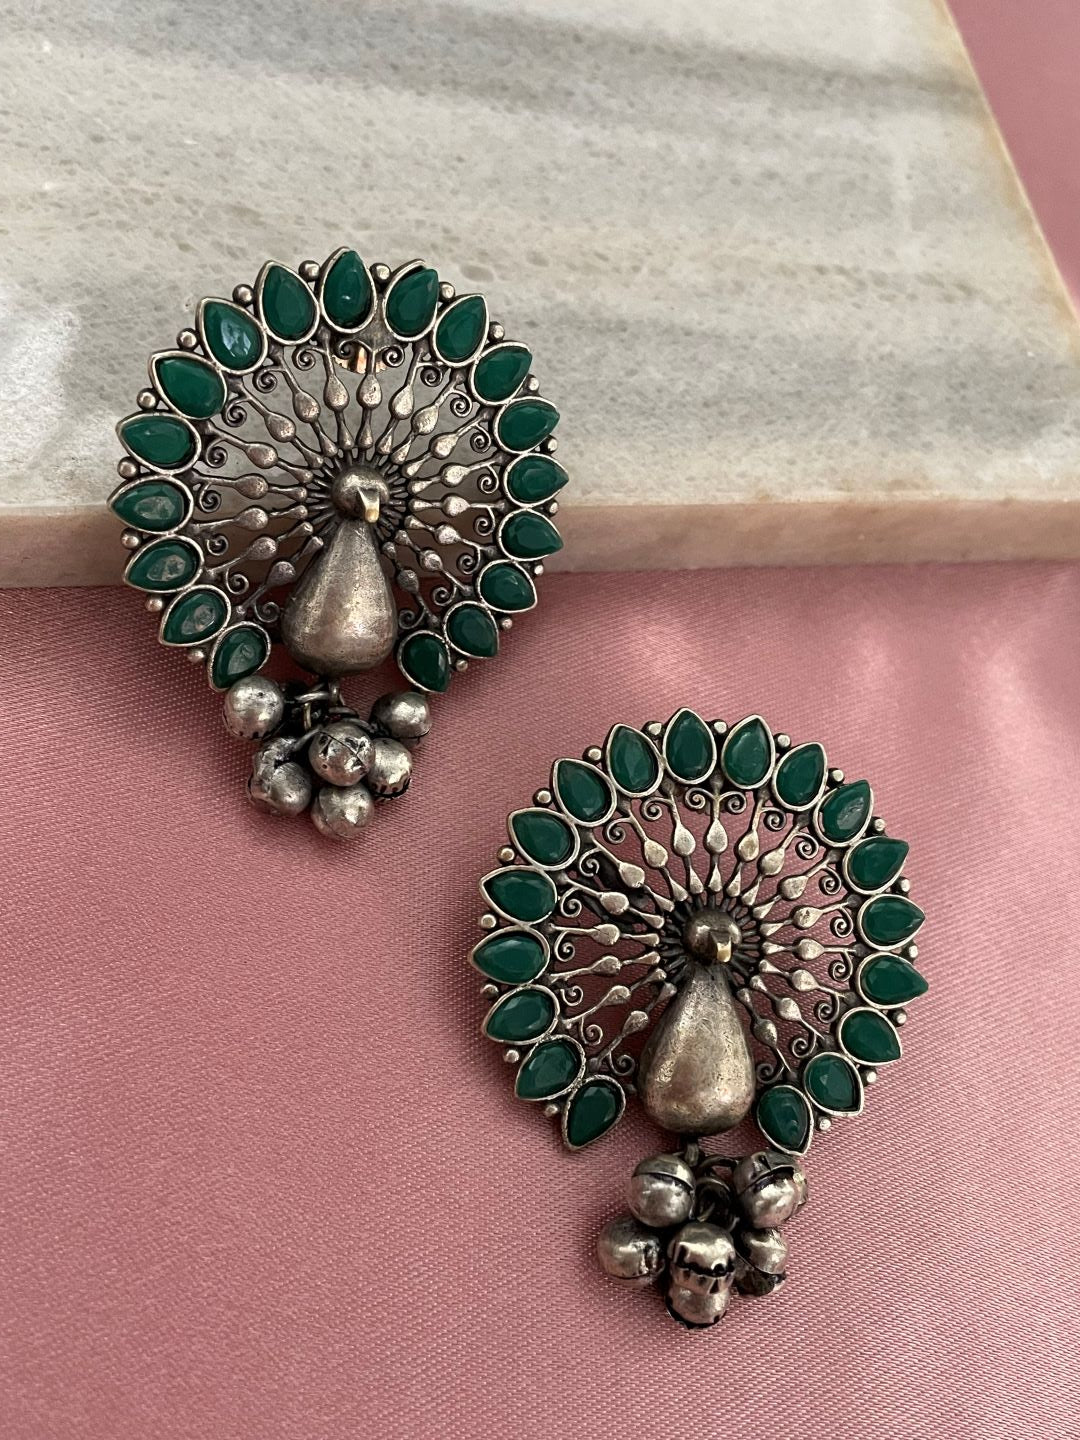 German Oxidized Silver Stud Earrings Peacock Design With Green Stones and Silver Bells